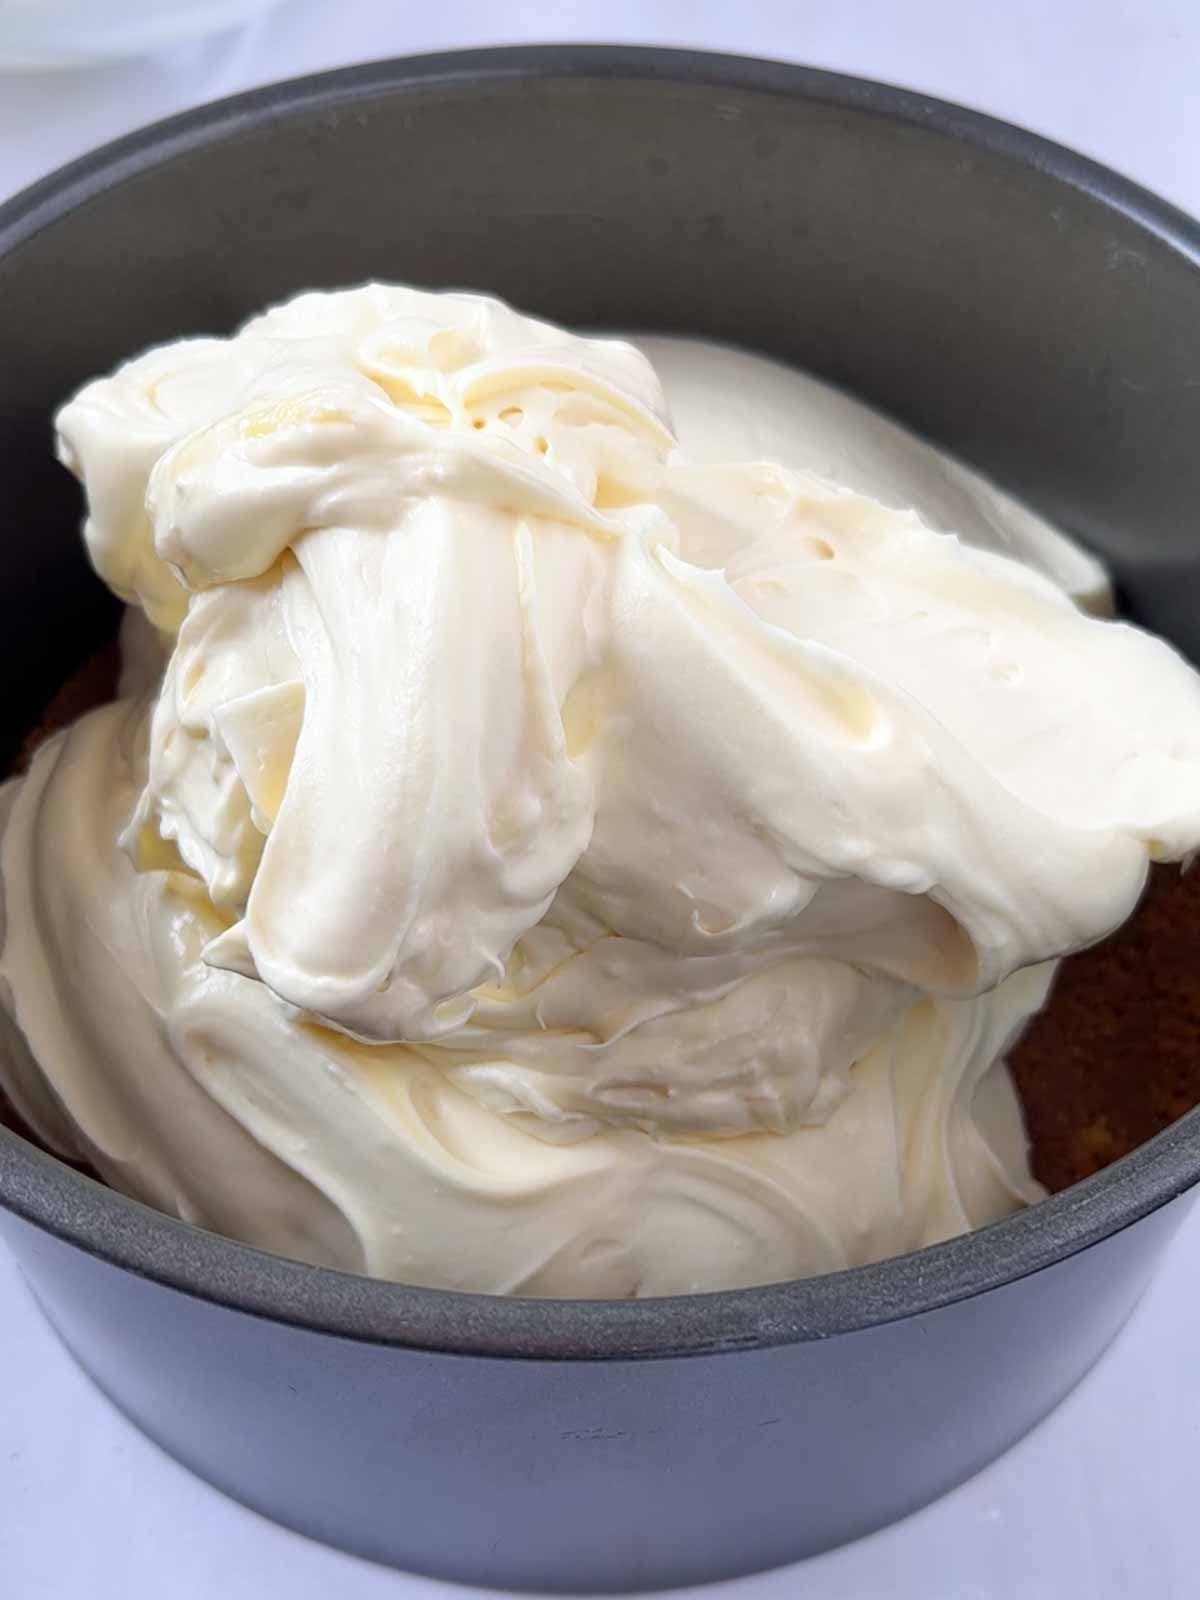 Whipped cream on top of a biscuit base for step 5 in the recipe for White Chocolate Cheesecake.